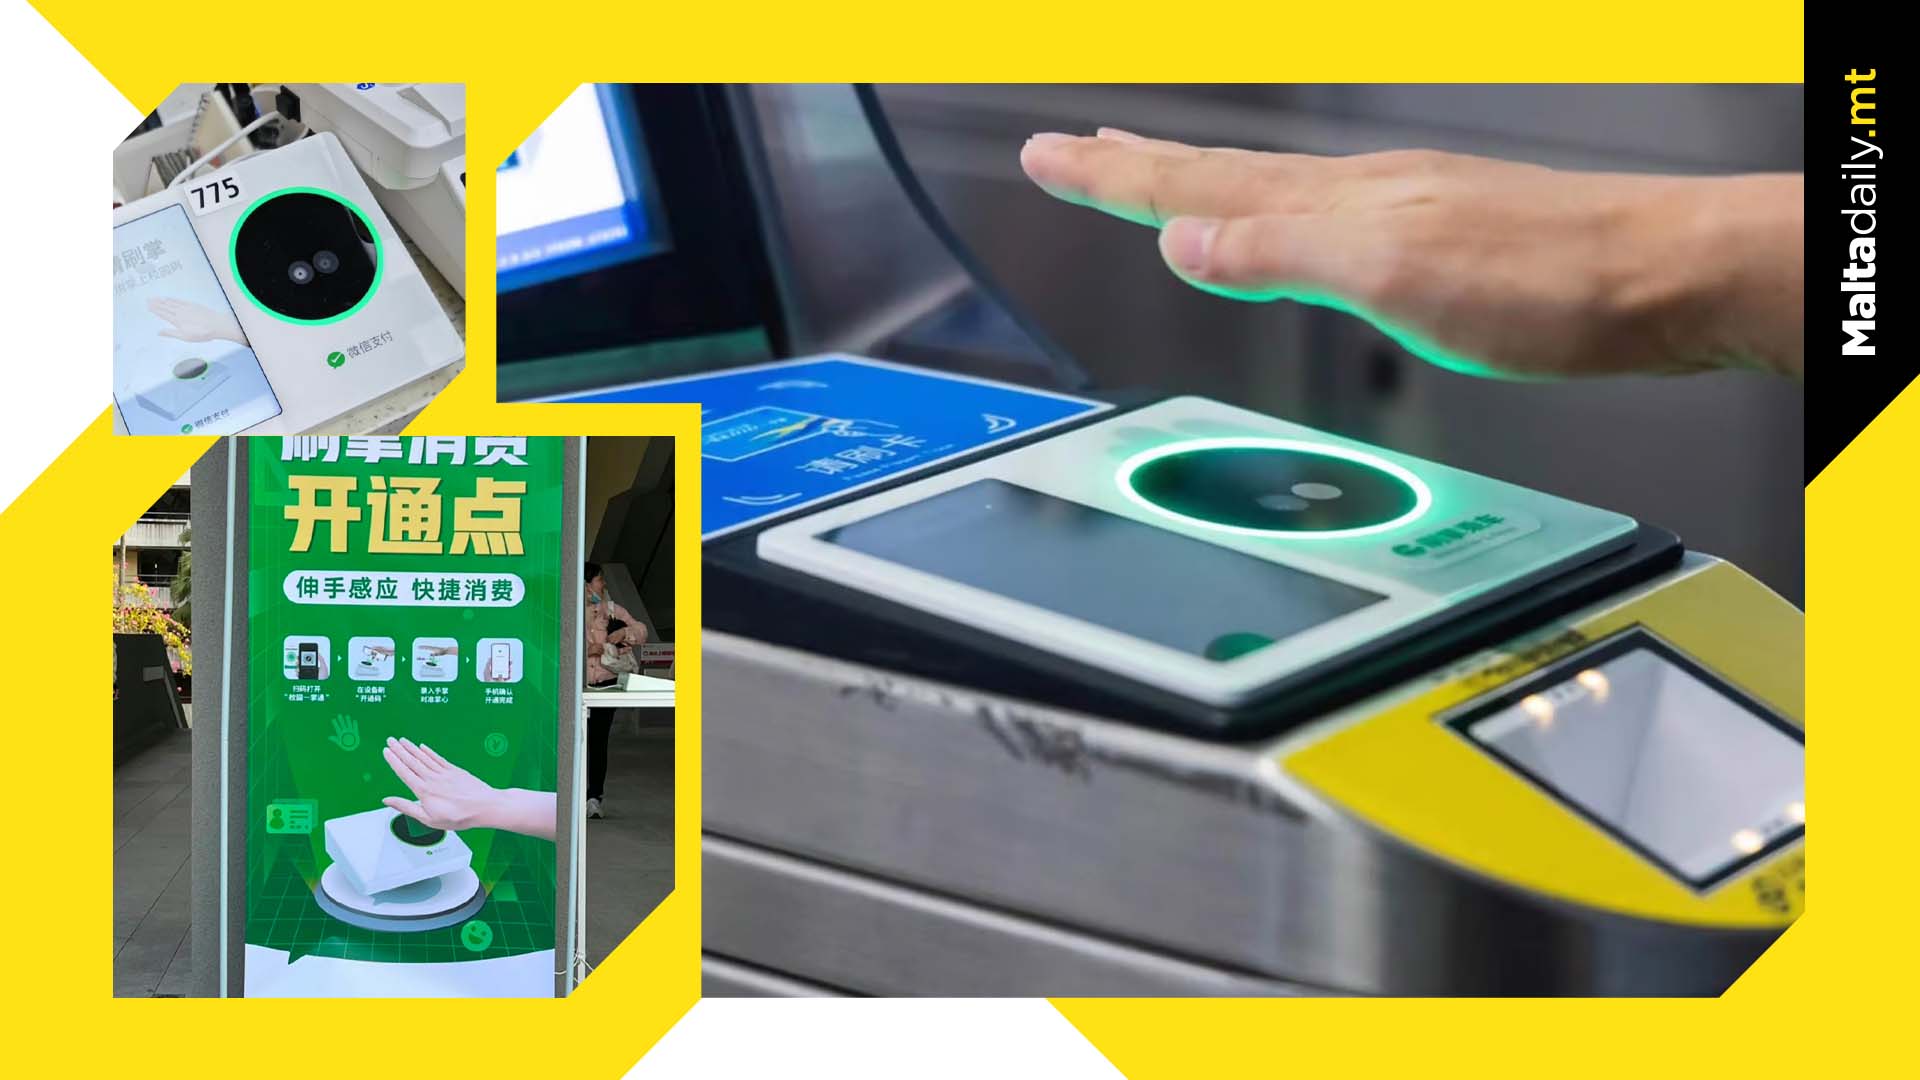 Residents in China can now pay using the palm of their hands